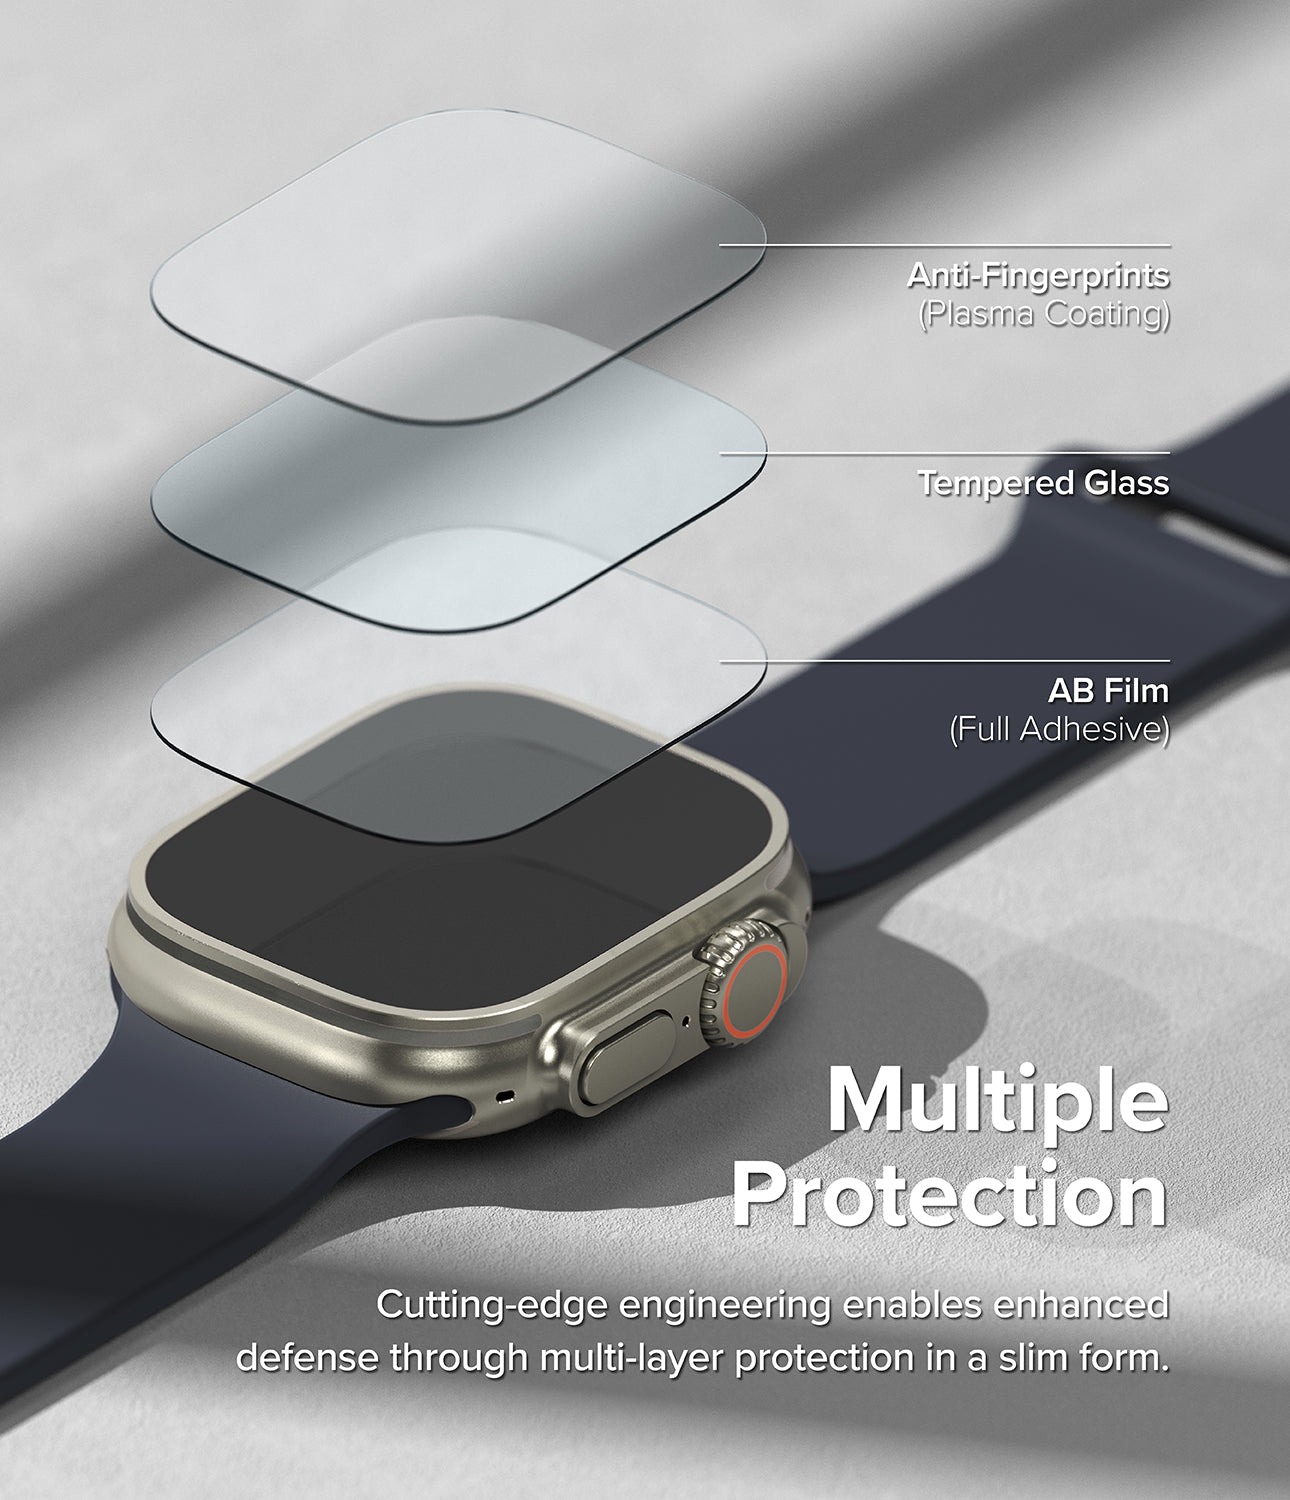 Multiple Protection - Cutting-edge engineering enables enhanced defense through multi-layer protection in a slim form.